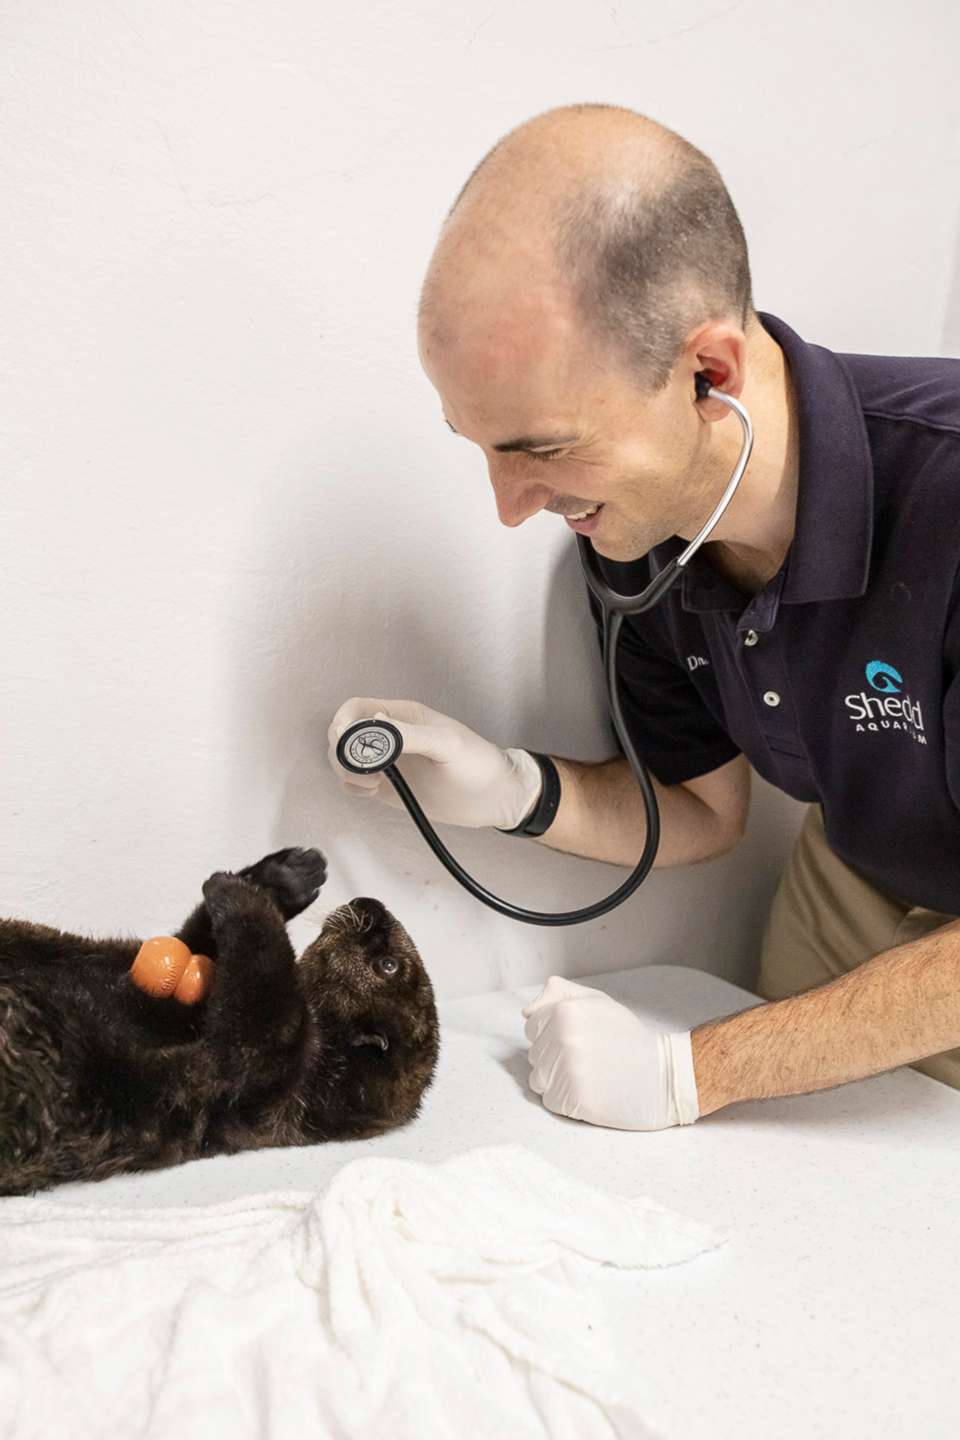 PHOTO: The sea otter pups receive a checkup from an Shedd's animal care team member.